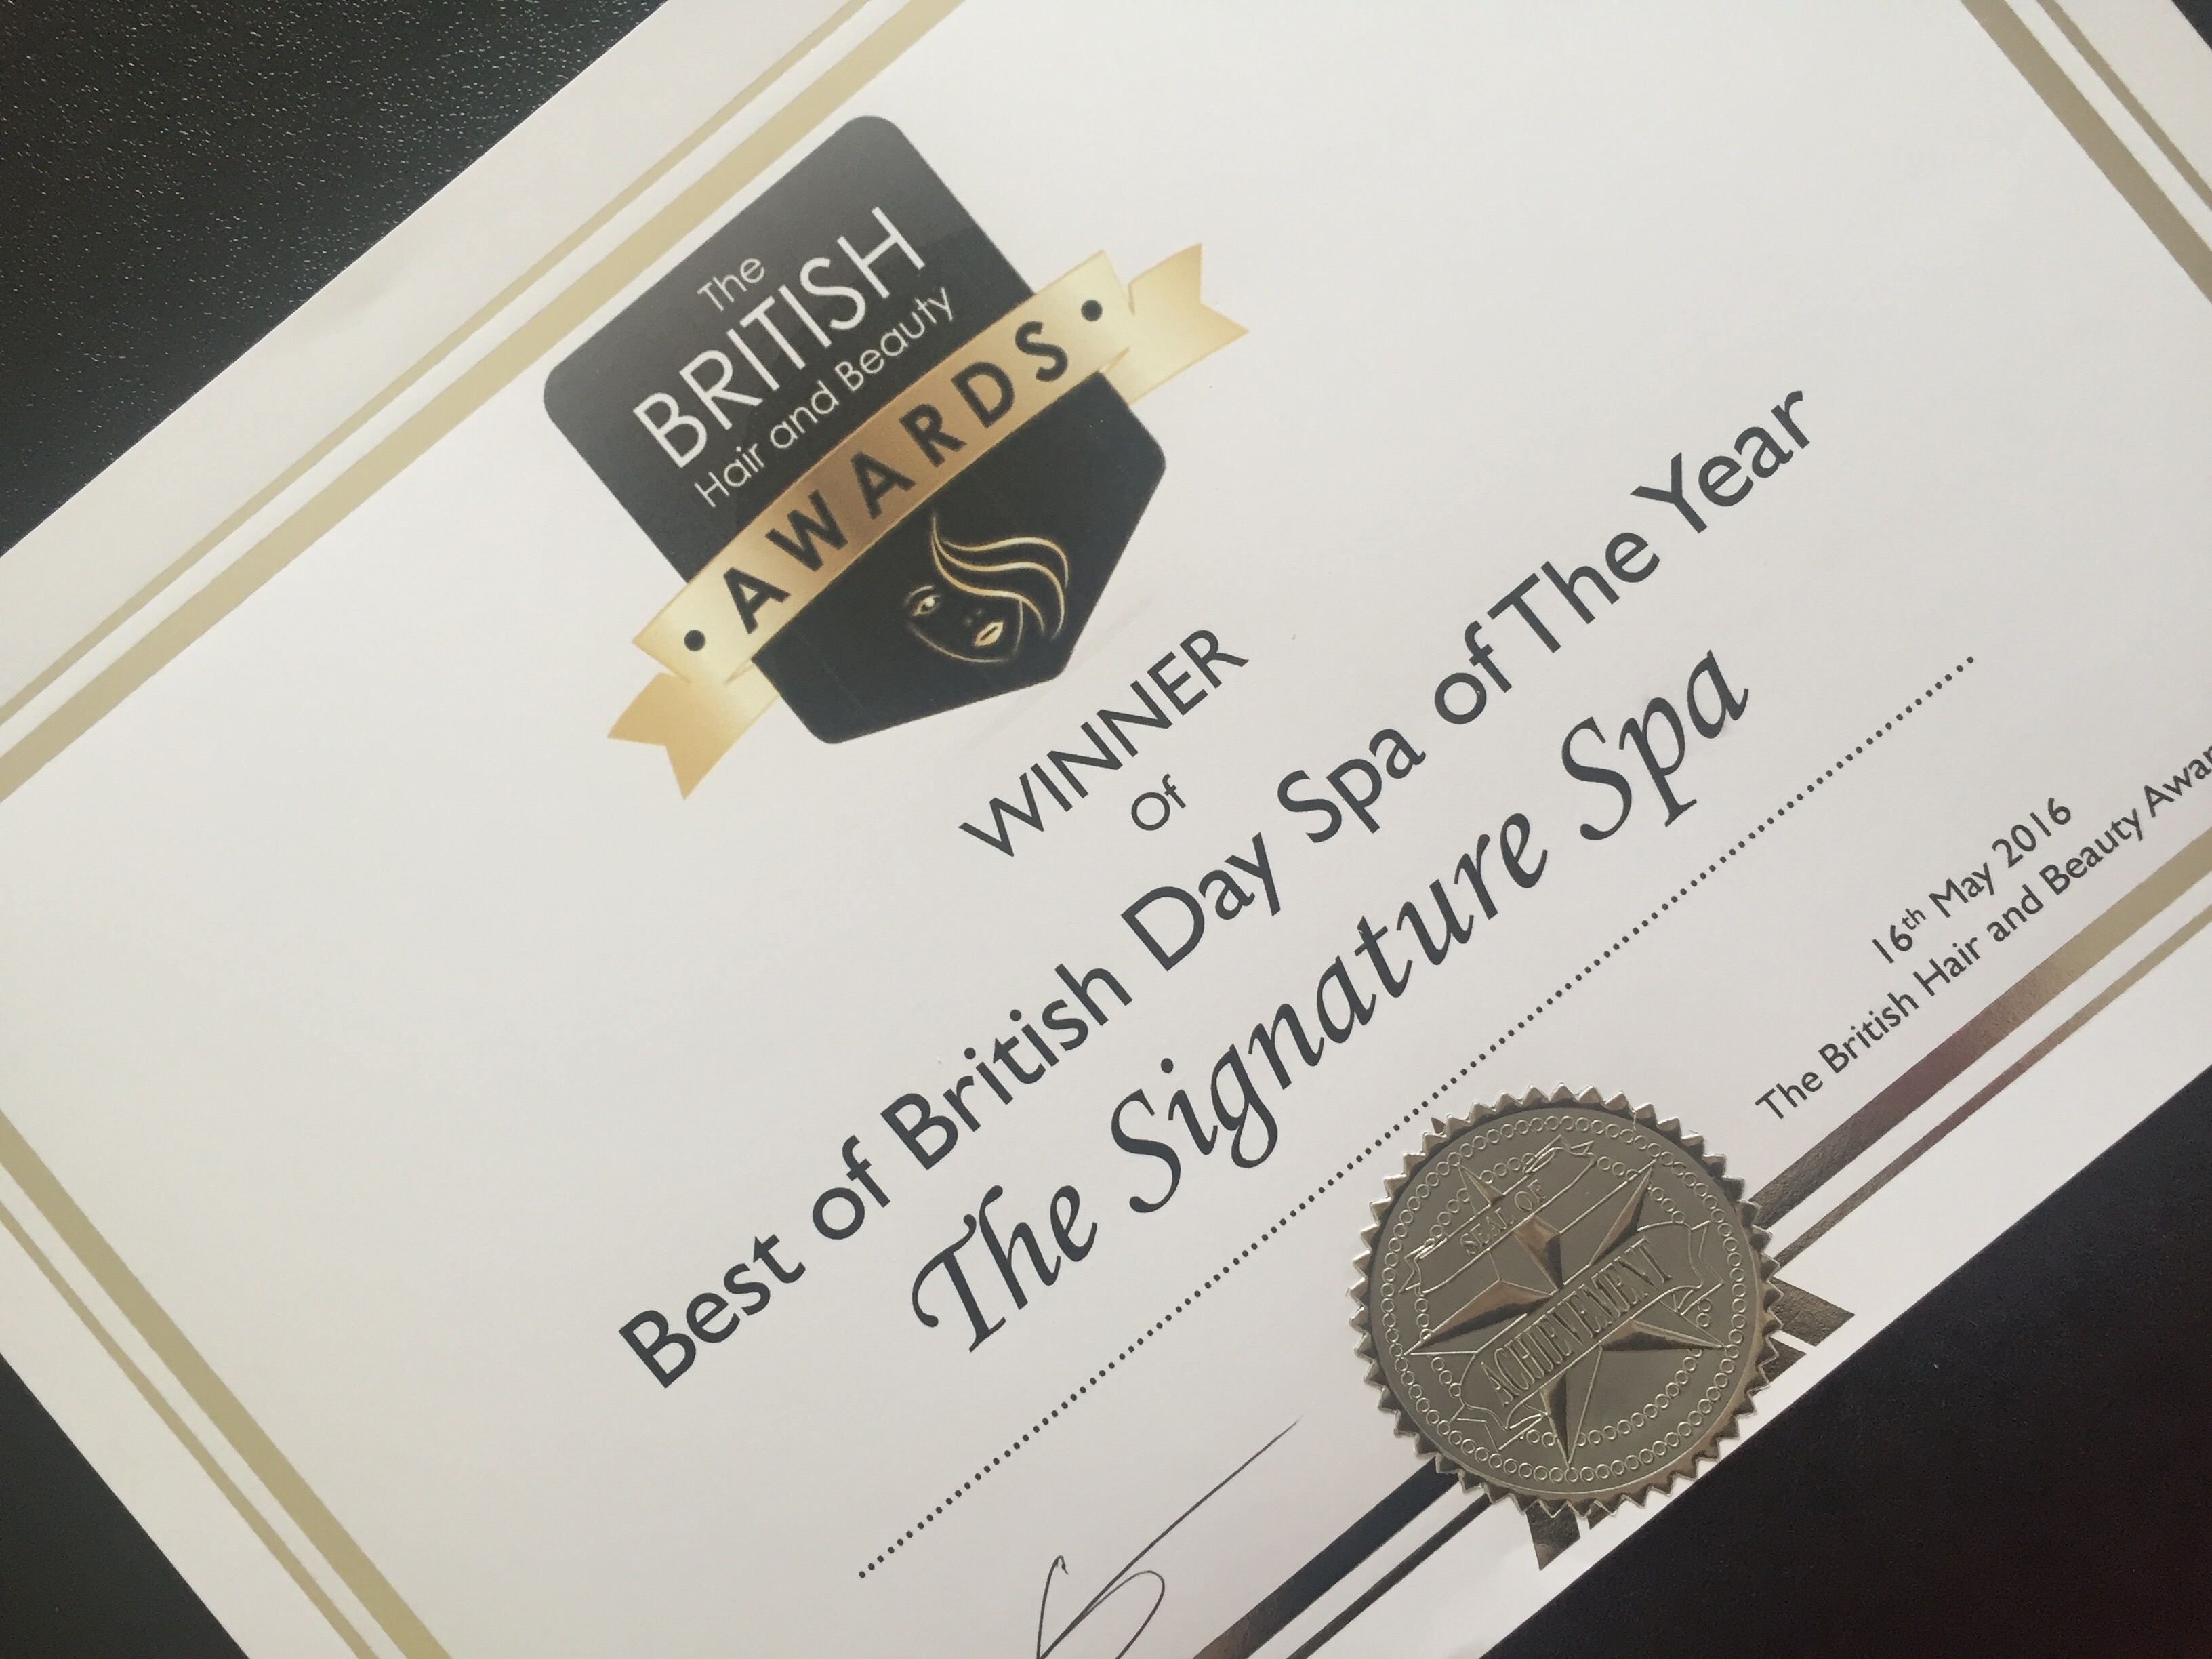 Best of British Day Spa of the Year 2016